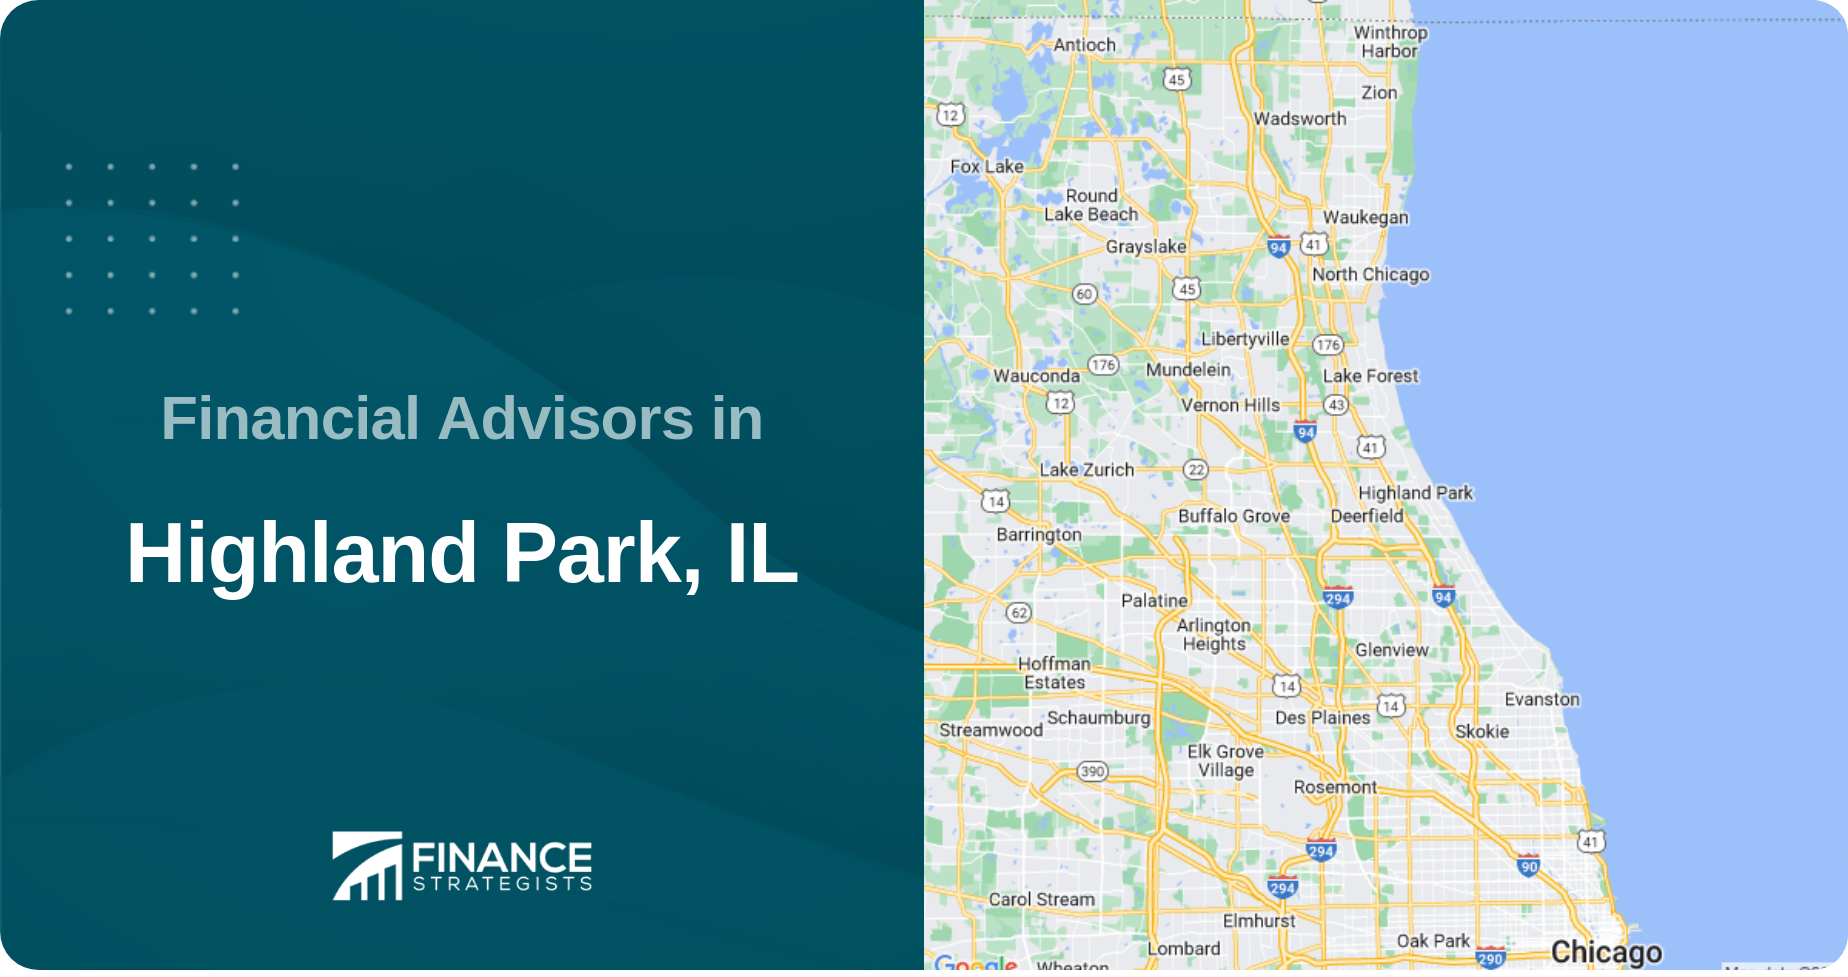 Financial Advisors in Highland Park, IL